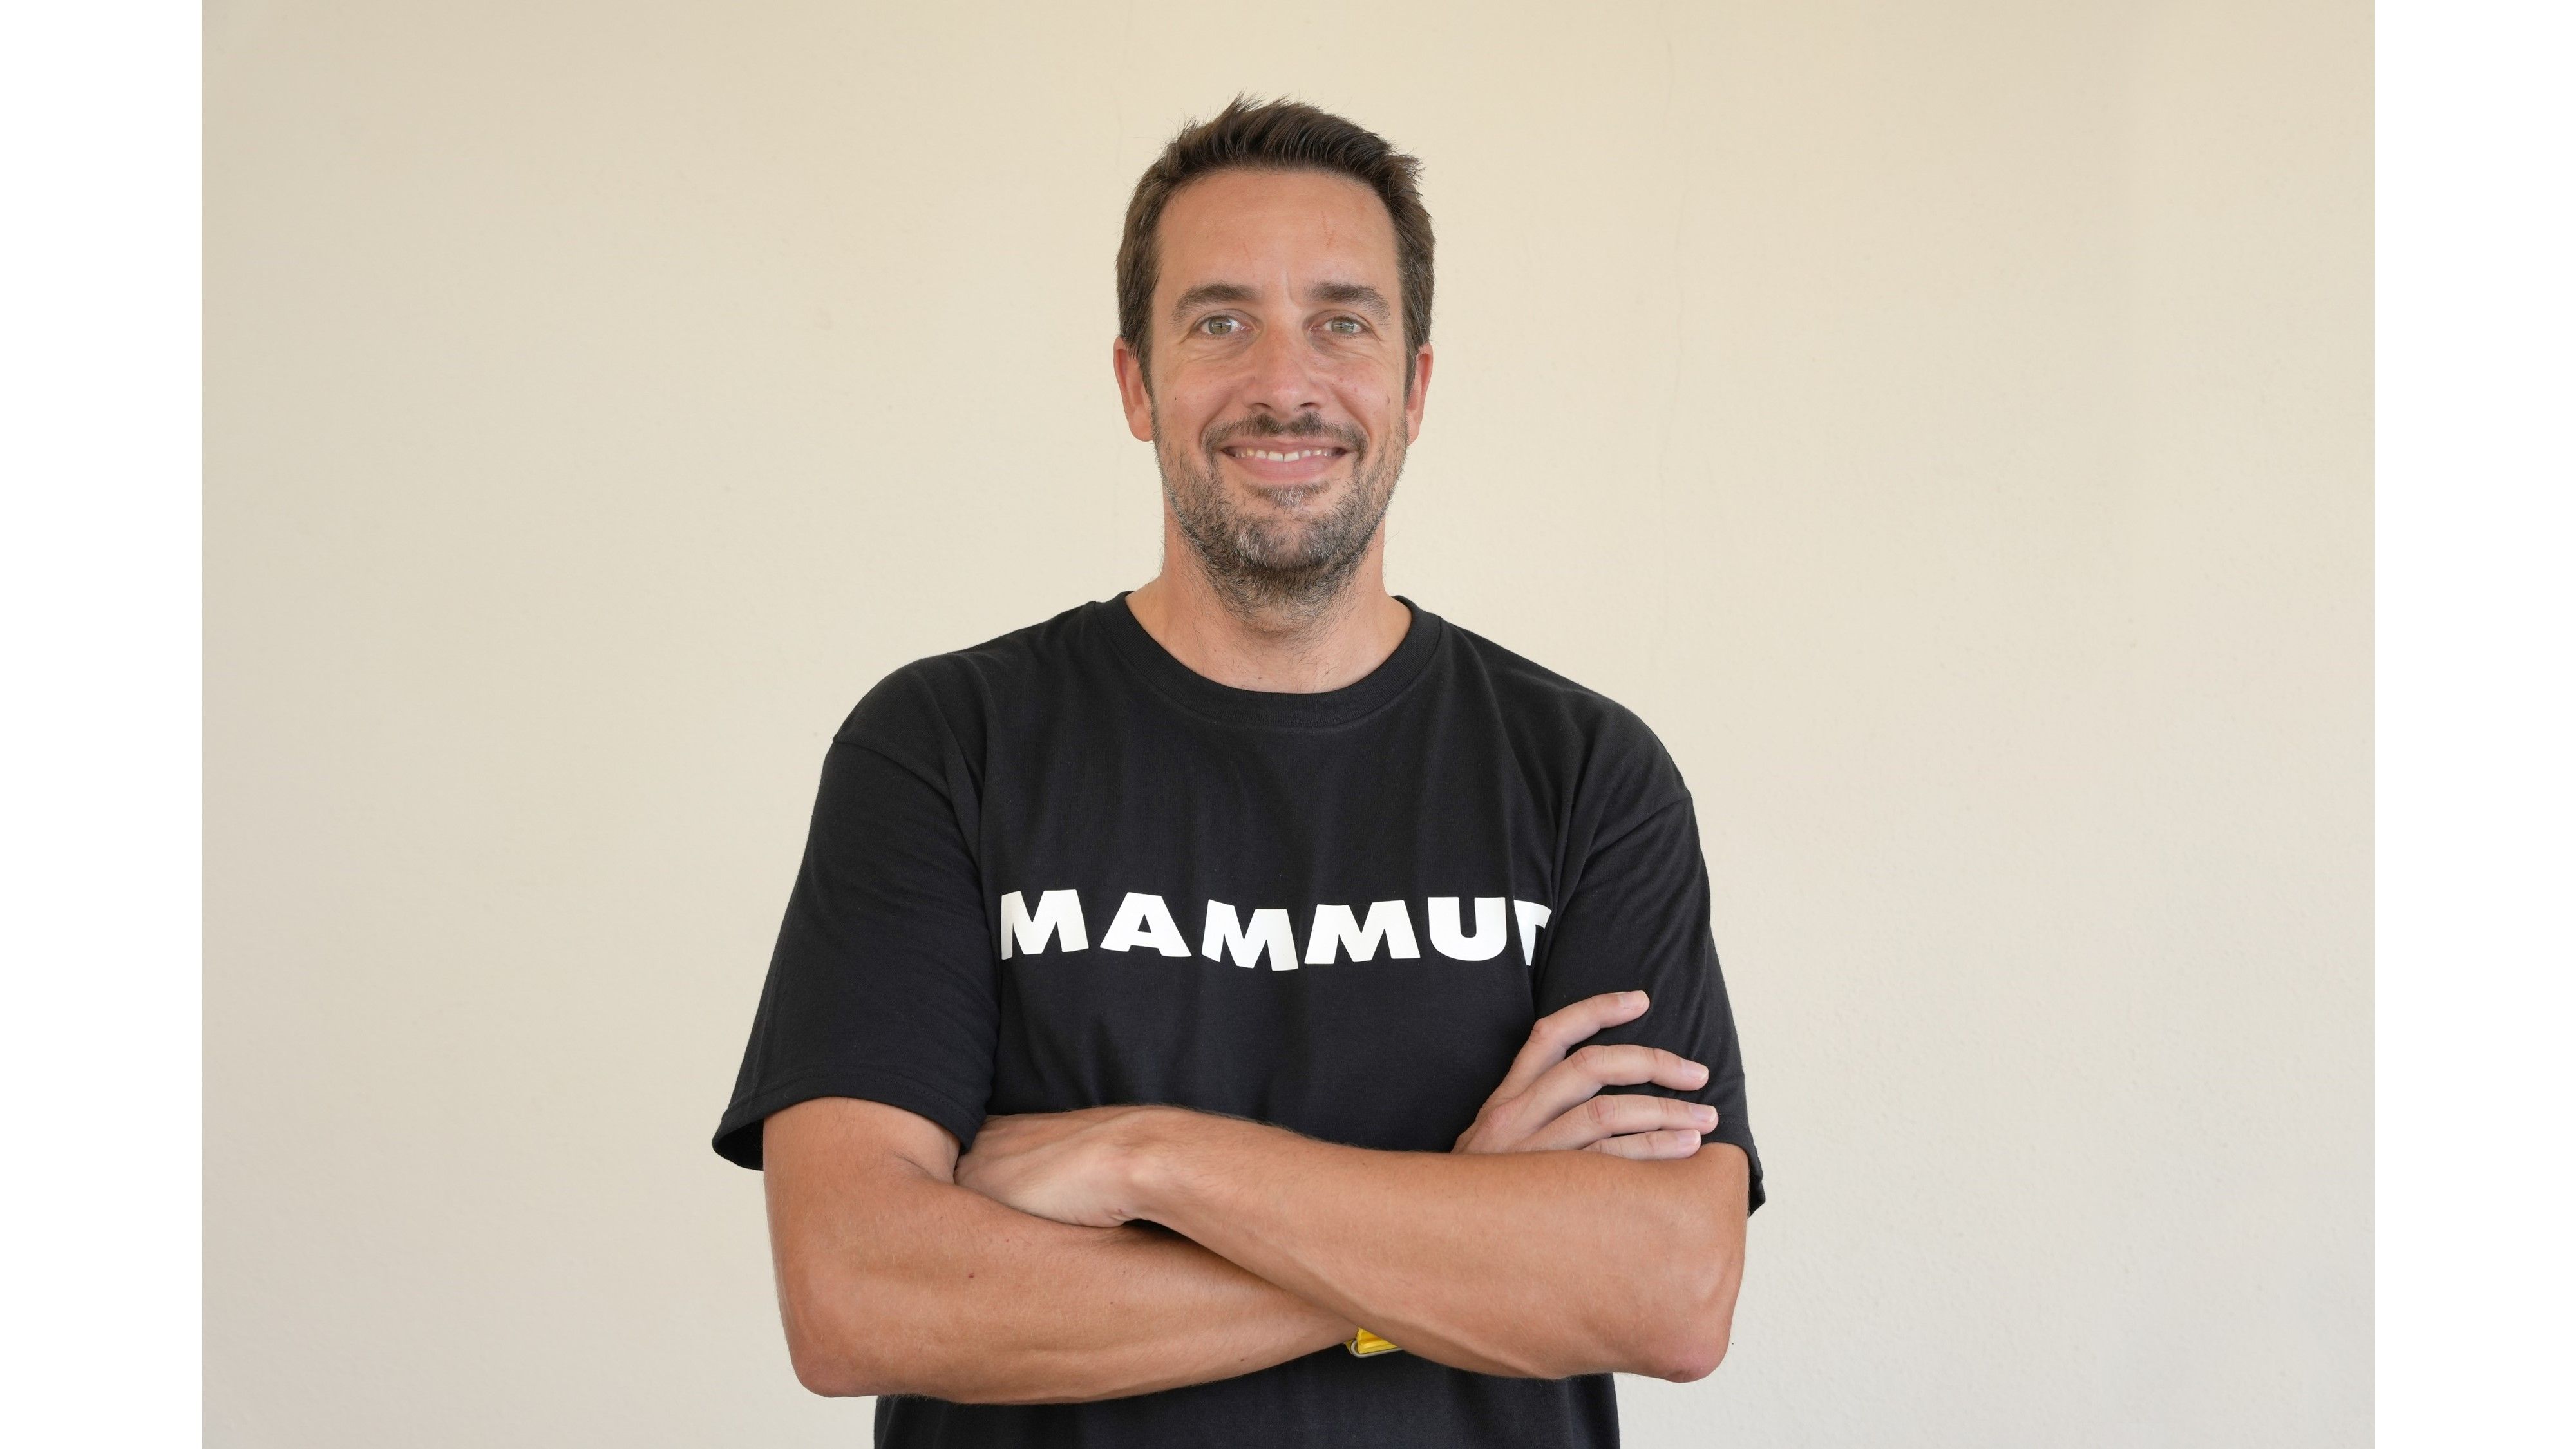 Nic Brandenberger, appointed CMO at Mammut